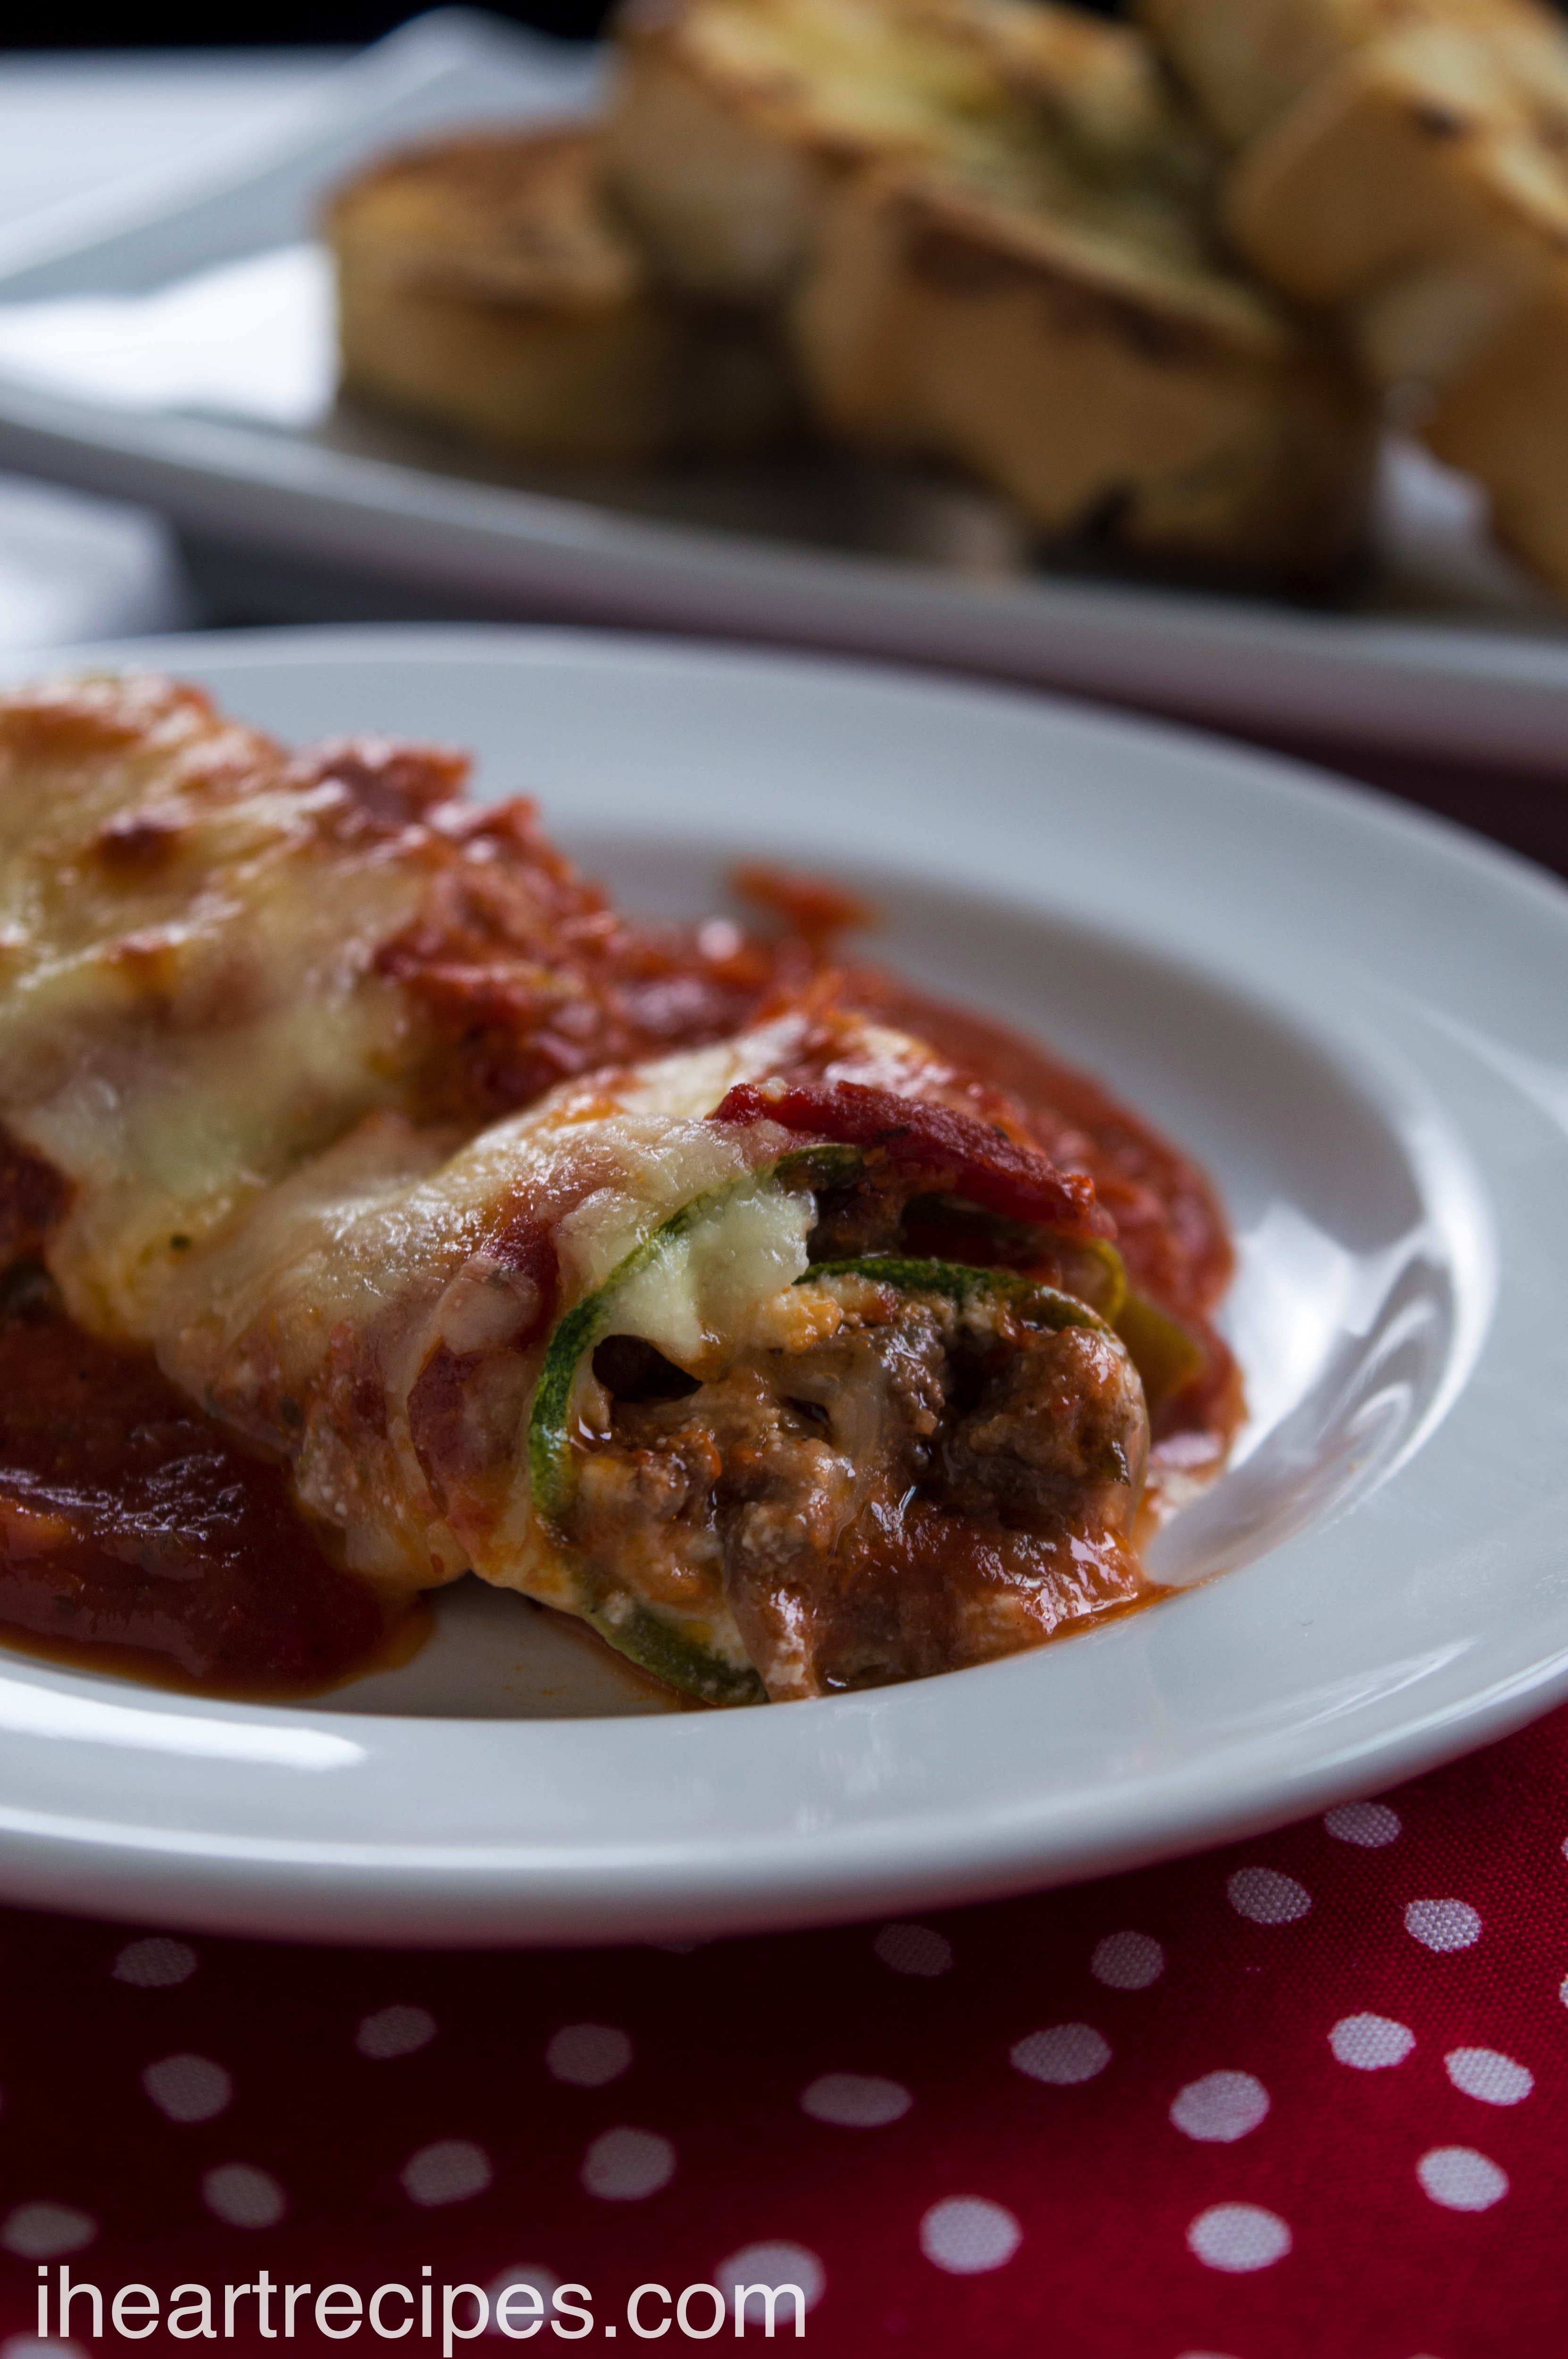 Tender zucchini wrapped around savory filling, topped with flavorful marinara sauce, served on a classic white plate. 